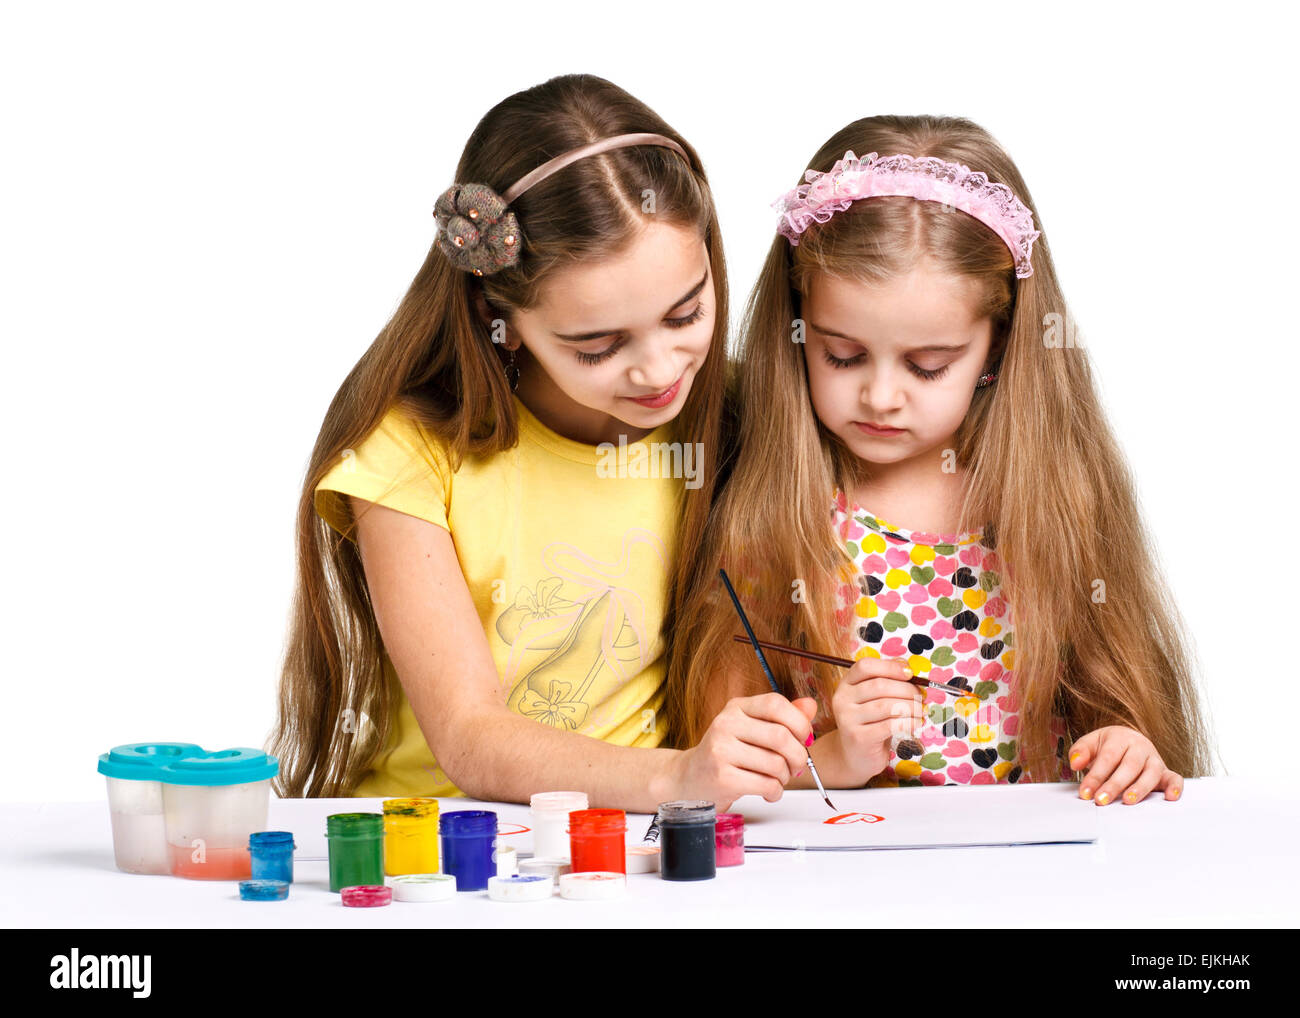 two girls painted Stock Photo